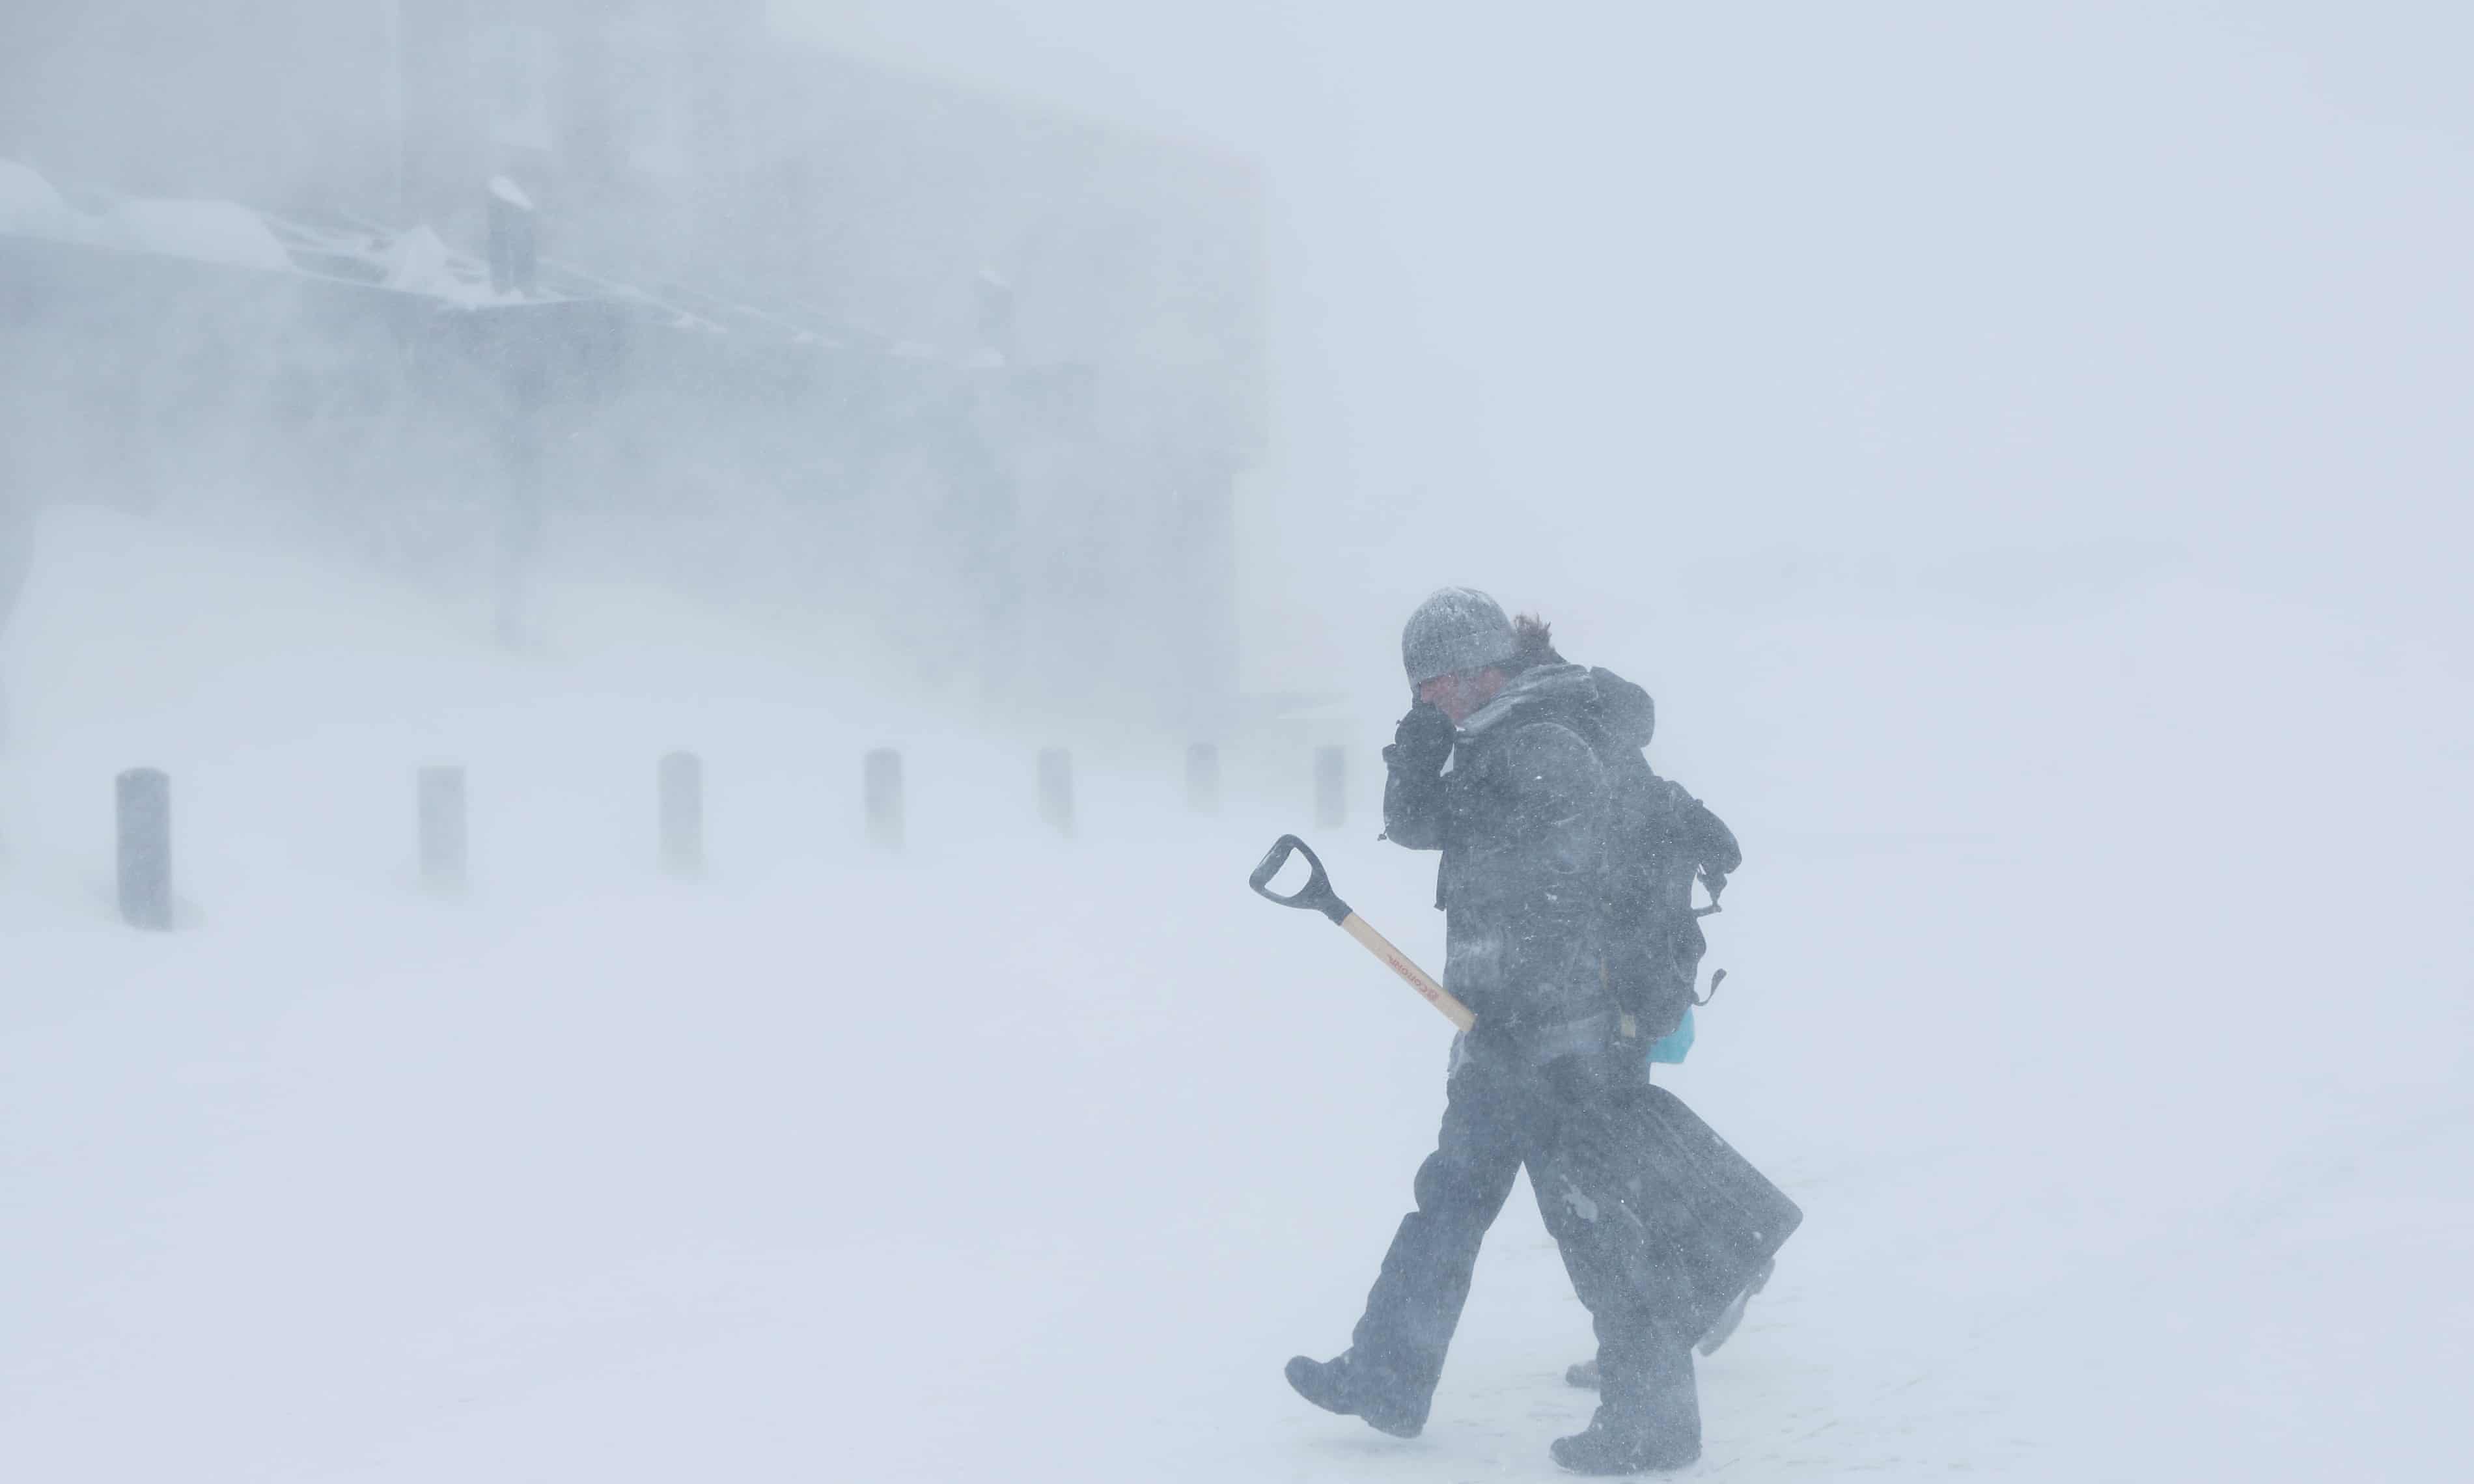 As bad as it gets’: powerful blizzard hits California, closing roads and ski resorts (theguardian.com)